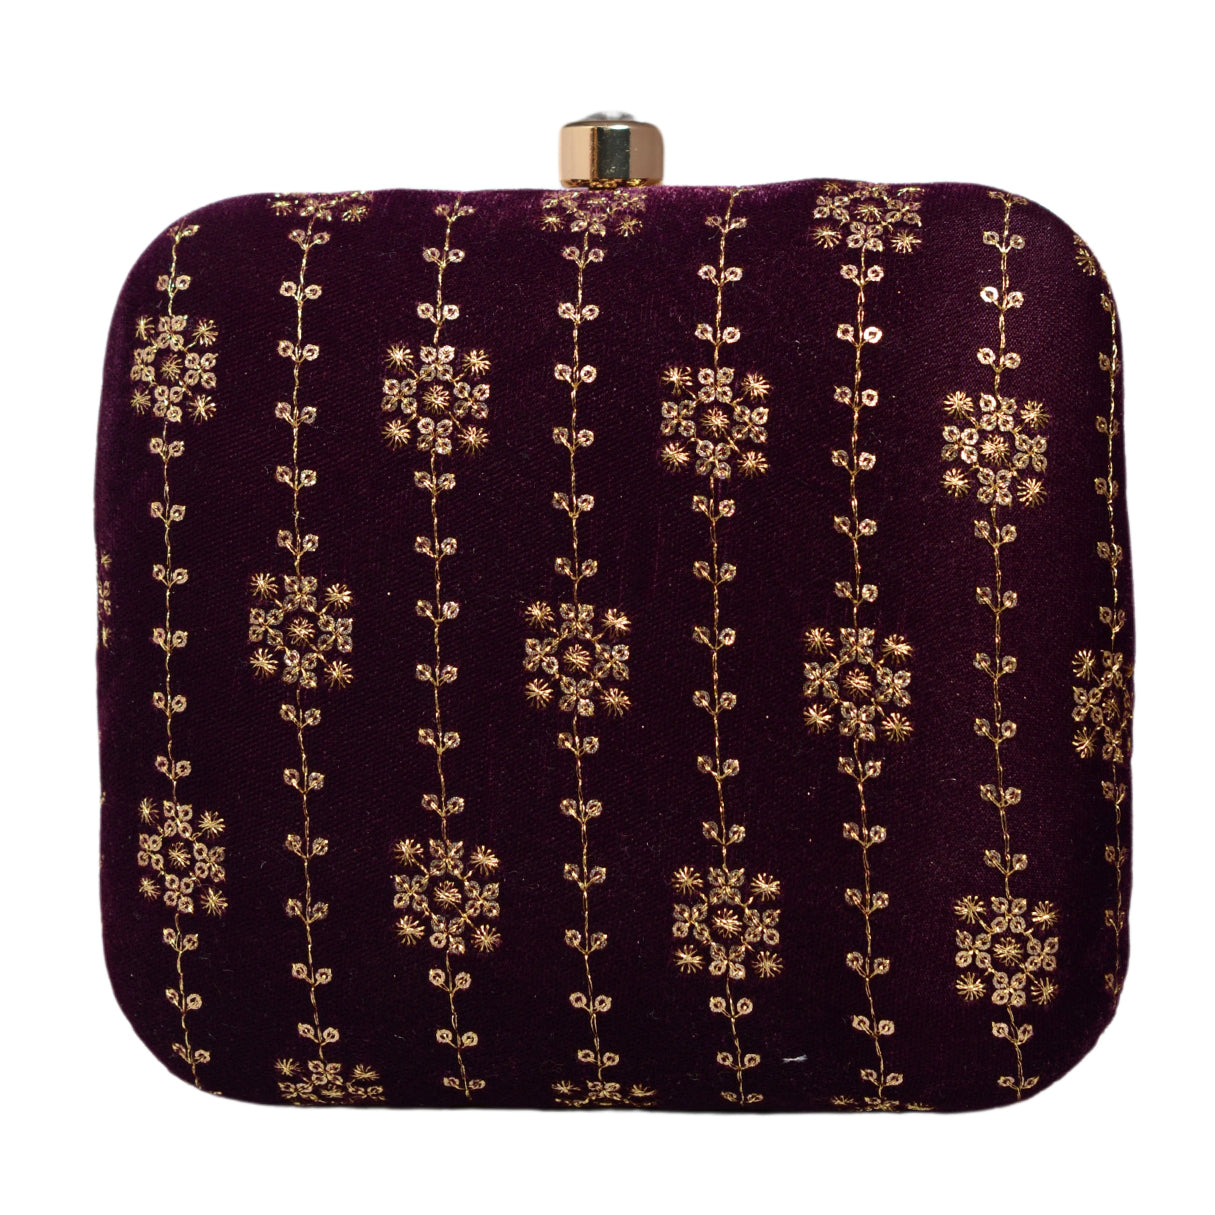 Wine And Golden Sequins Embroidery Clutch